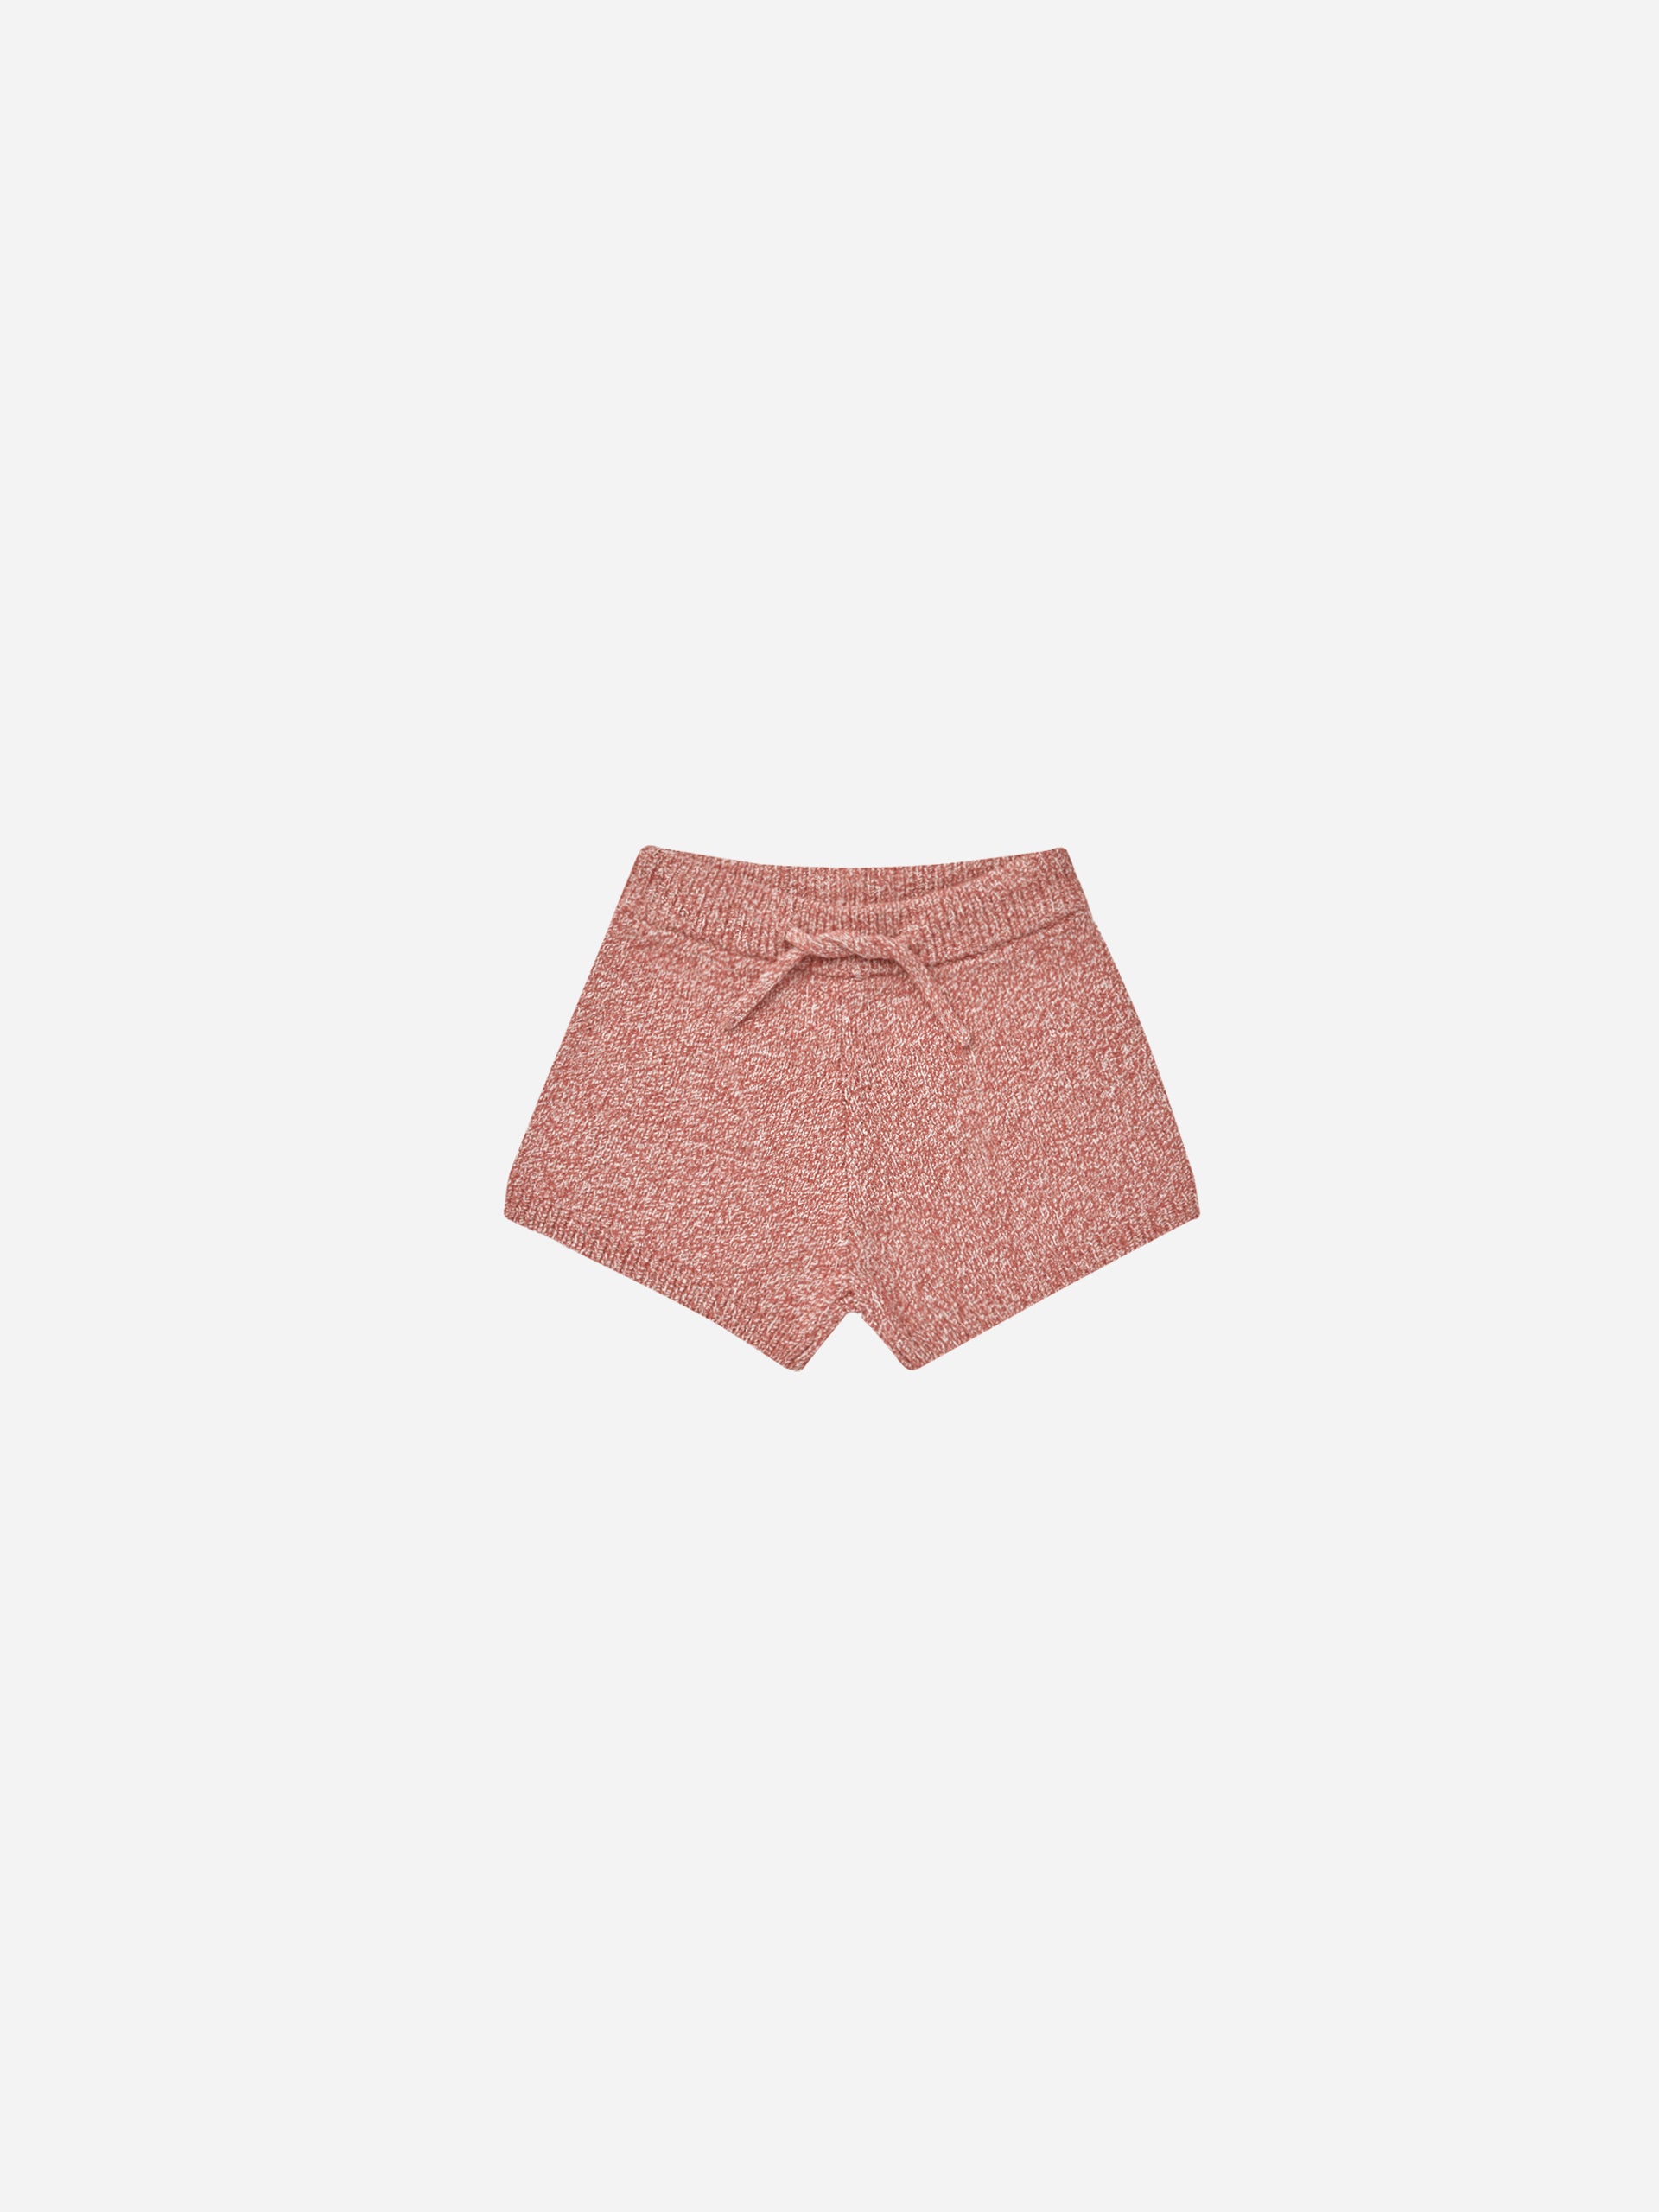 Knit Short || Heathered Strawberry - Rylee + Cru | Kids Clothes | Trendy Baby Clothes | Modern Infant Outfits |